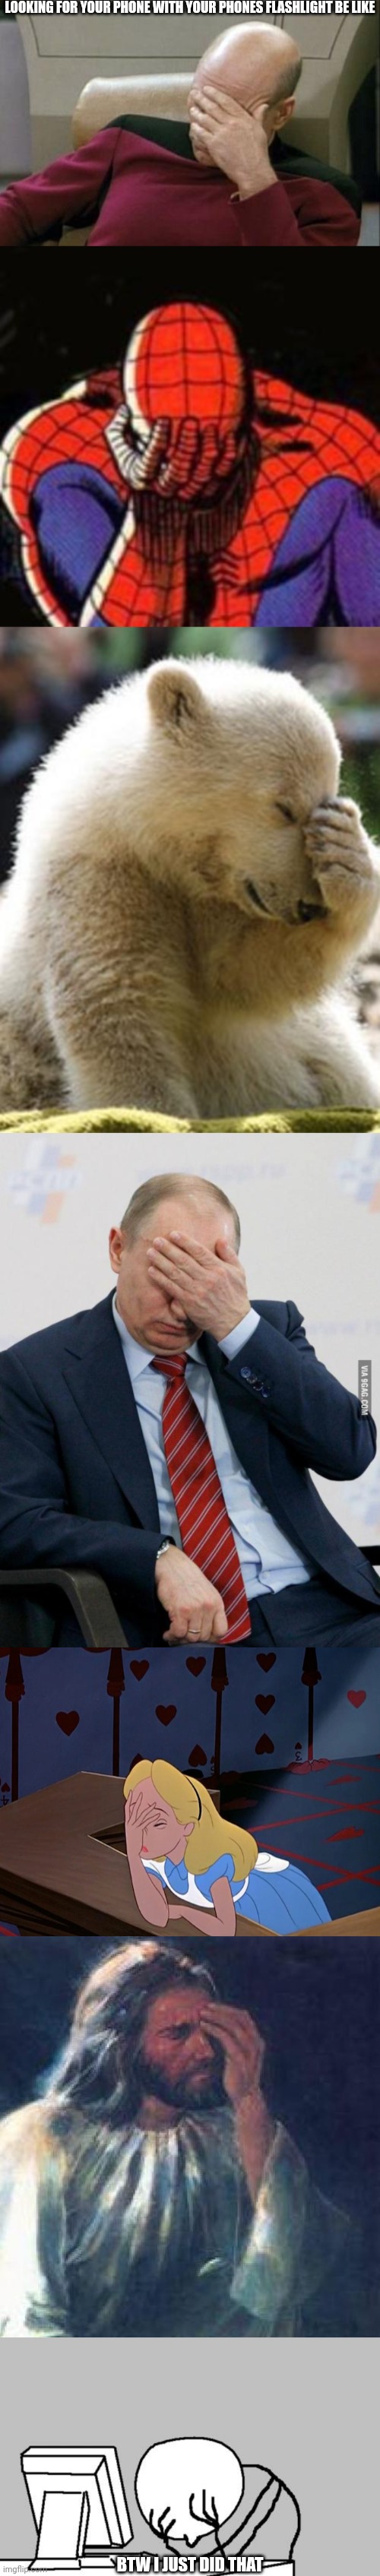 LOOKING FOR YOUR PHONE WITH YOUR PHONES FLASHLIGHT BE LIKE; BTW I JUST DID THAT | image tagged in memes,captain picard facepalm,sad spiderman,facepalm bear,putin facepalm,alice in wonderland face palm facepalm | made w/ Imgflip meme maker